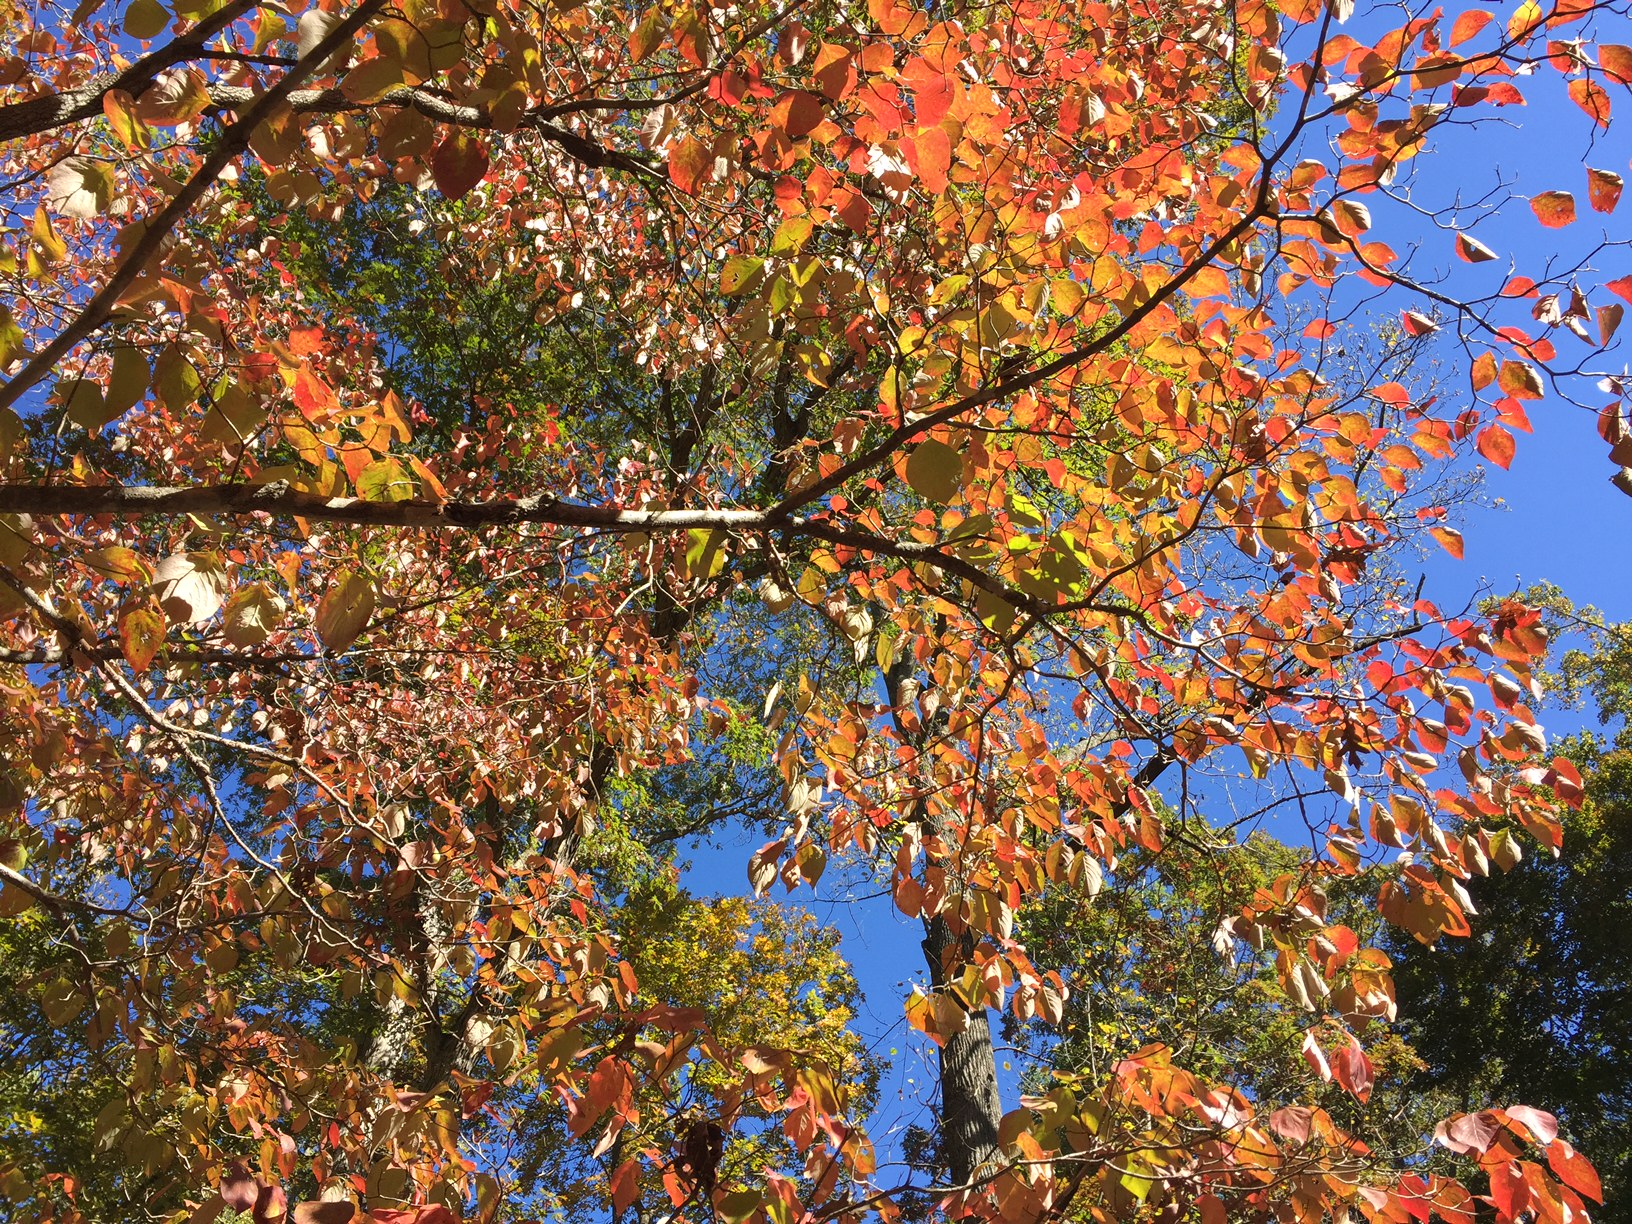 A tree with orange leaves against the blue sky